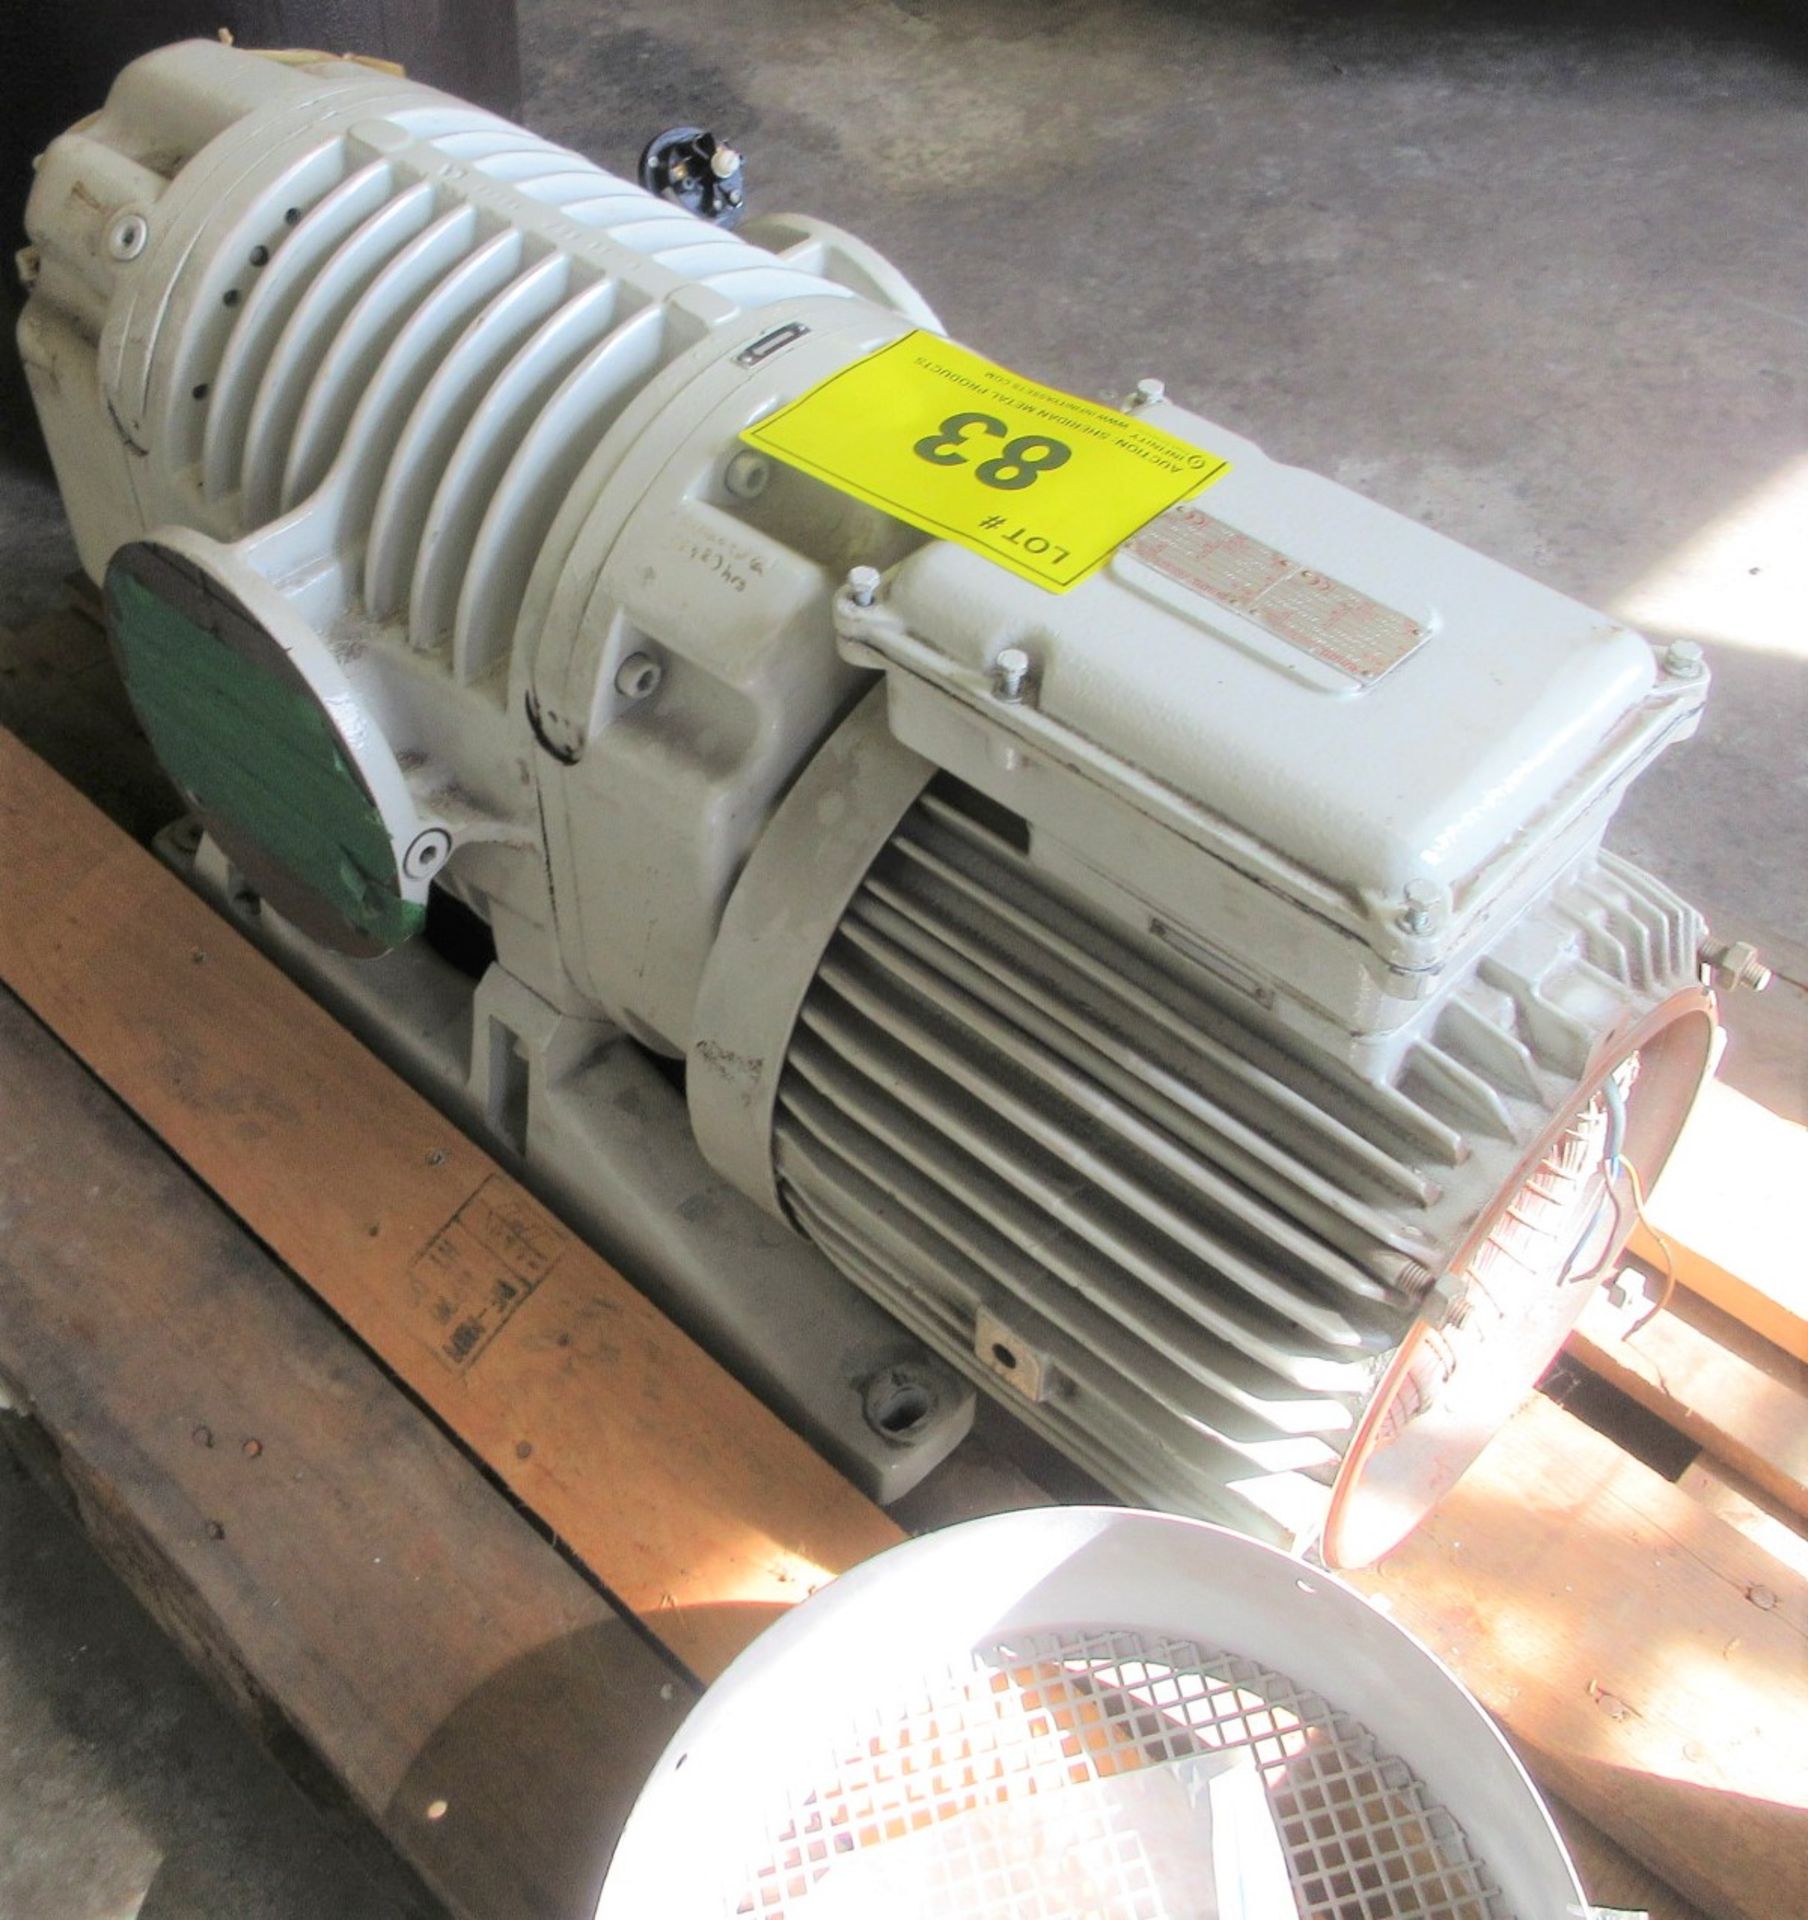 EMOD VUF 160M/2-130 MOTOR / BLOWER AND WESTINGHOUSE 7.5HP MOTOR (SUBJECT TO BULK BID LOT 74A) - Image 4 of 8